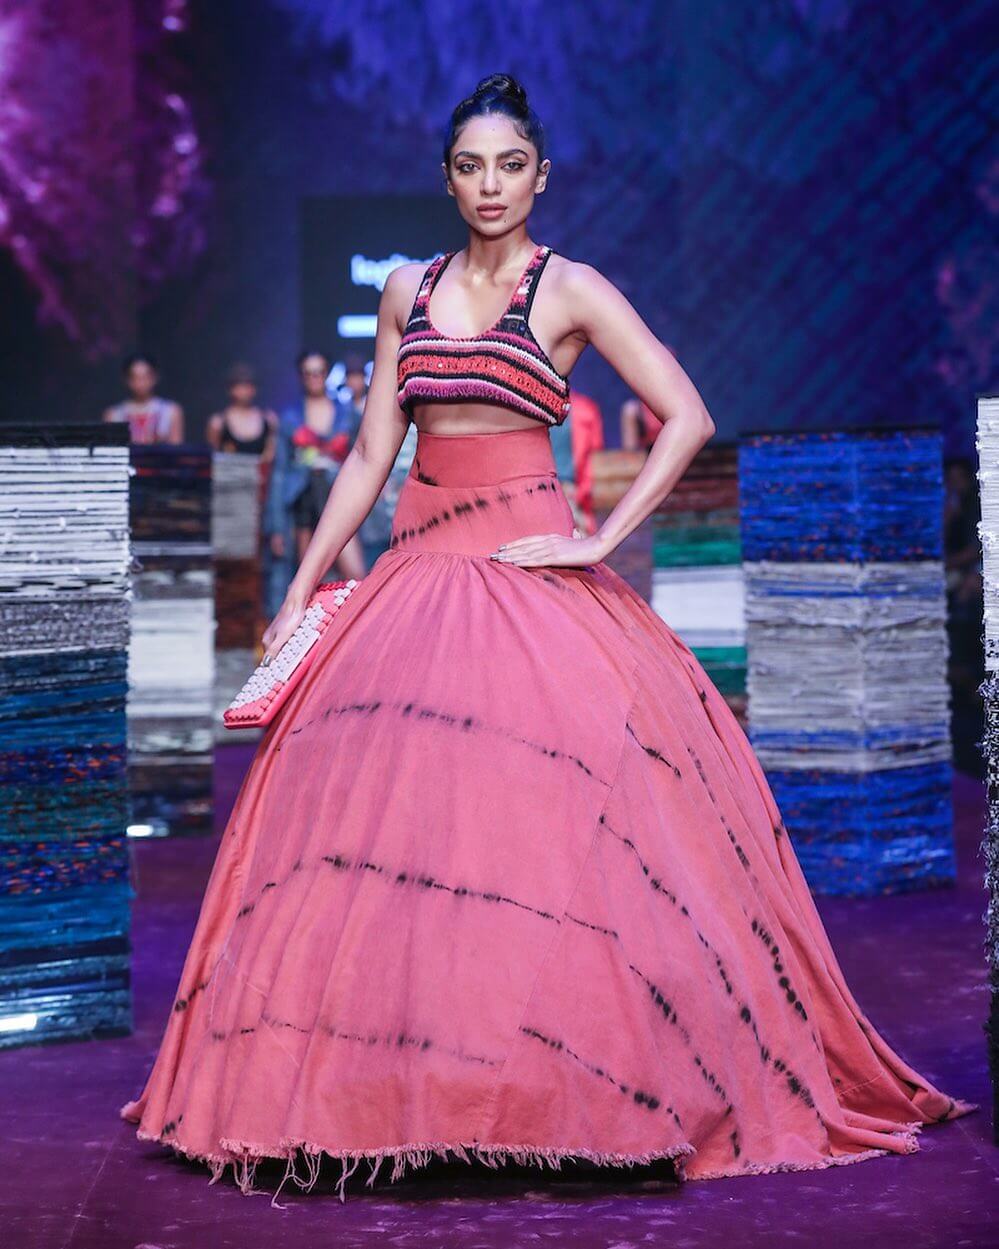 Lakme Fashion Week Bollywood Celebrities Spotted At The Runway - Glossy Sobhita In Fabulous Pink Gown